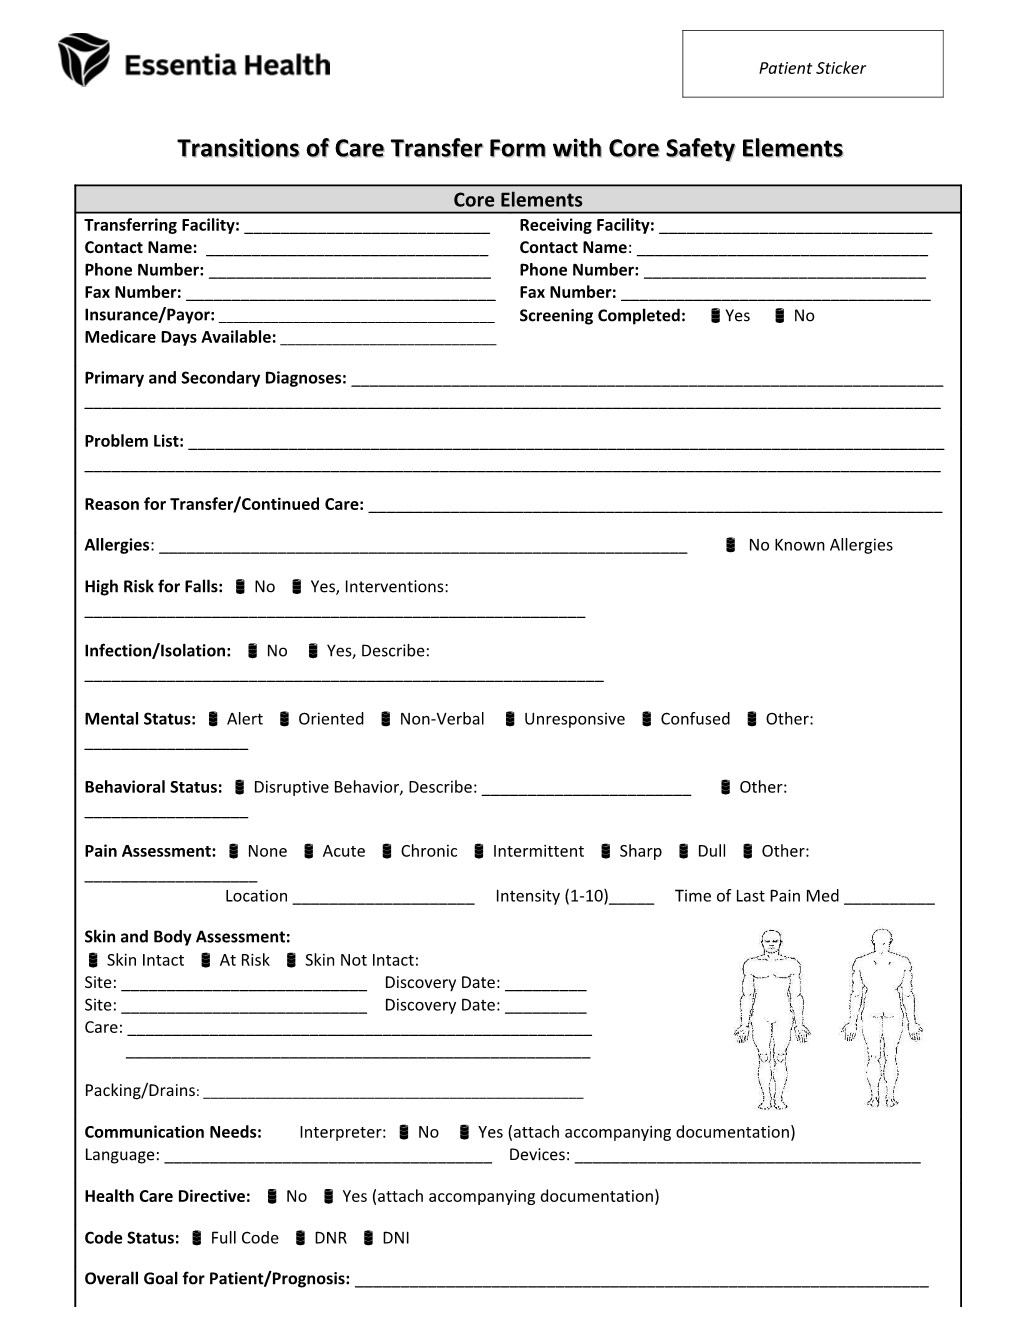 Transitions of Care Transfer Form with Core Safety Elements